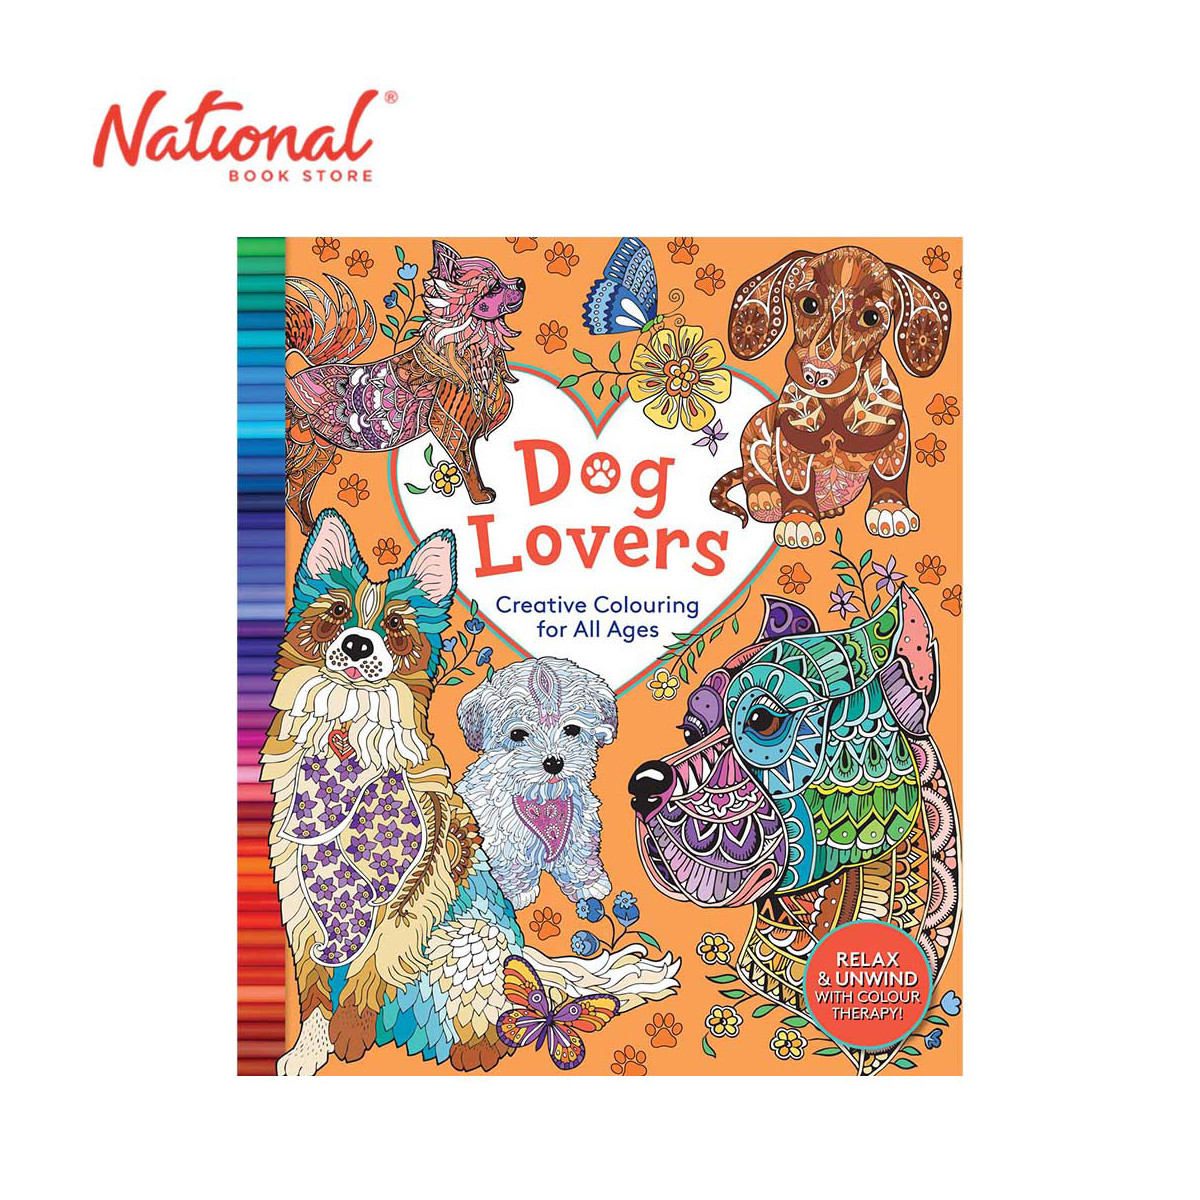 Dog Lovers: Creative Coloring for All Ages - Trade Paperback - Coloring Book